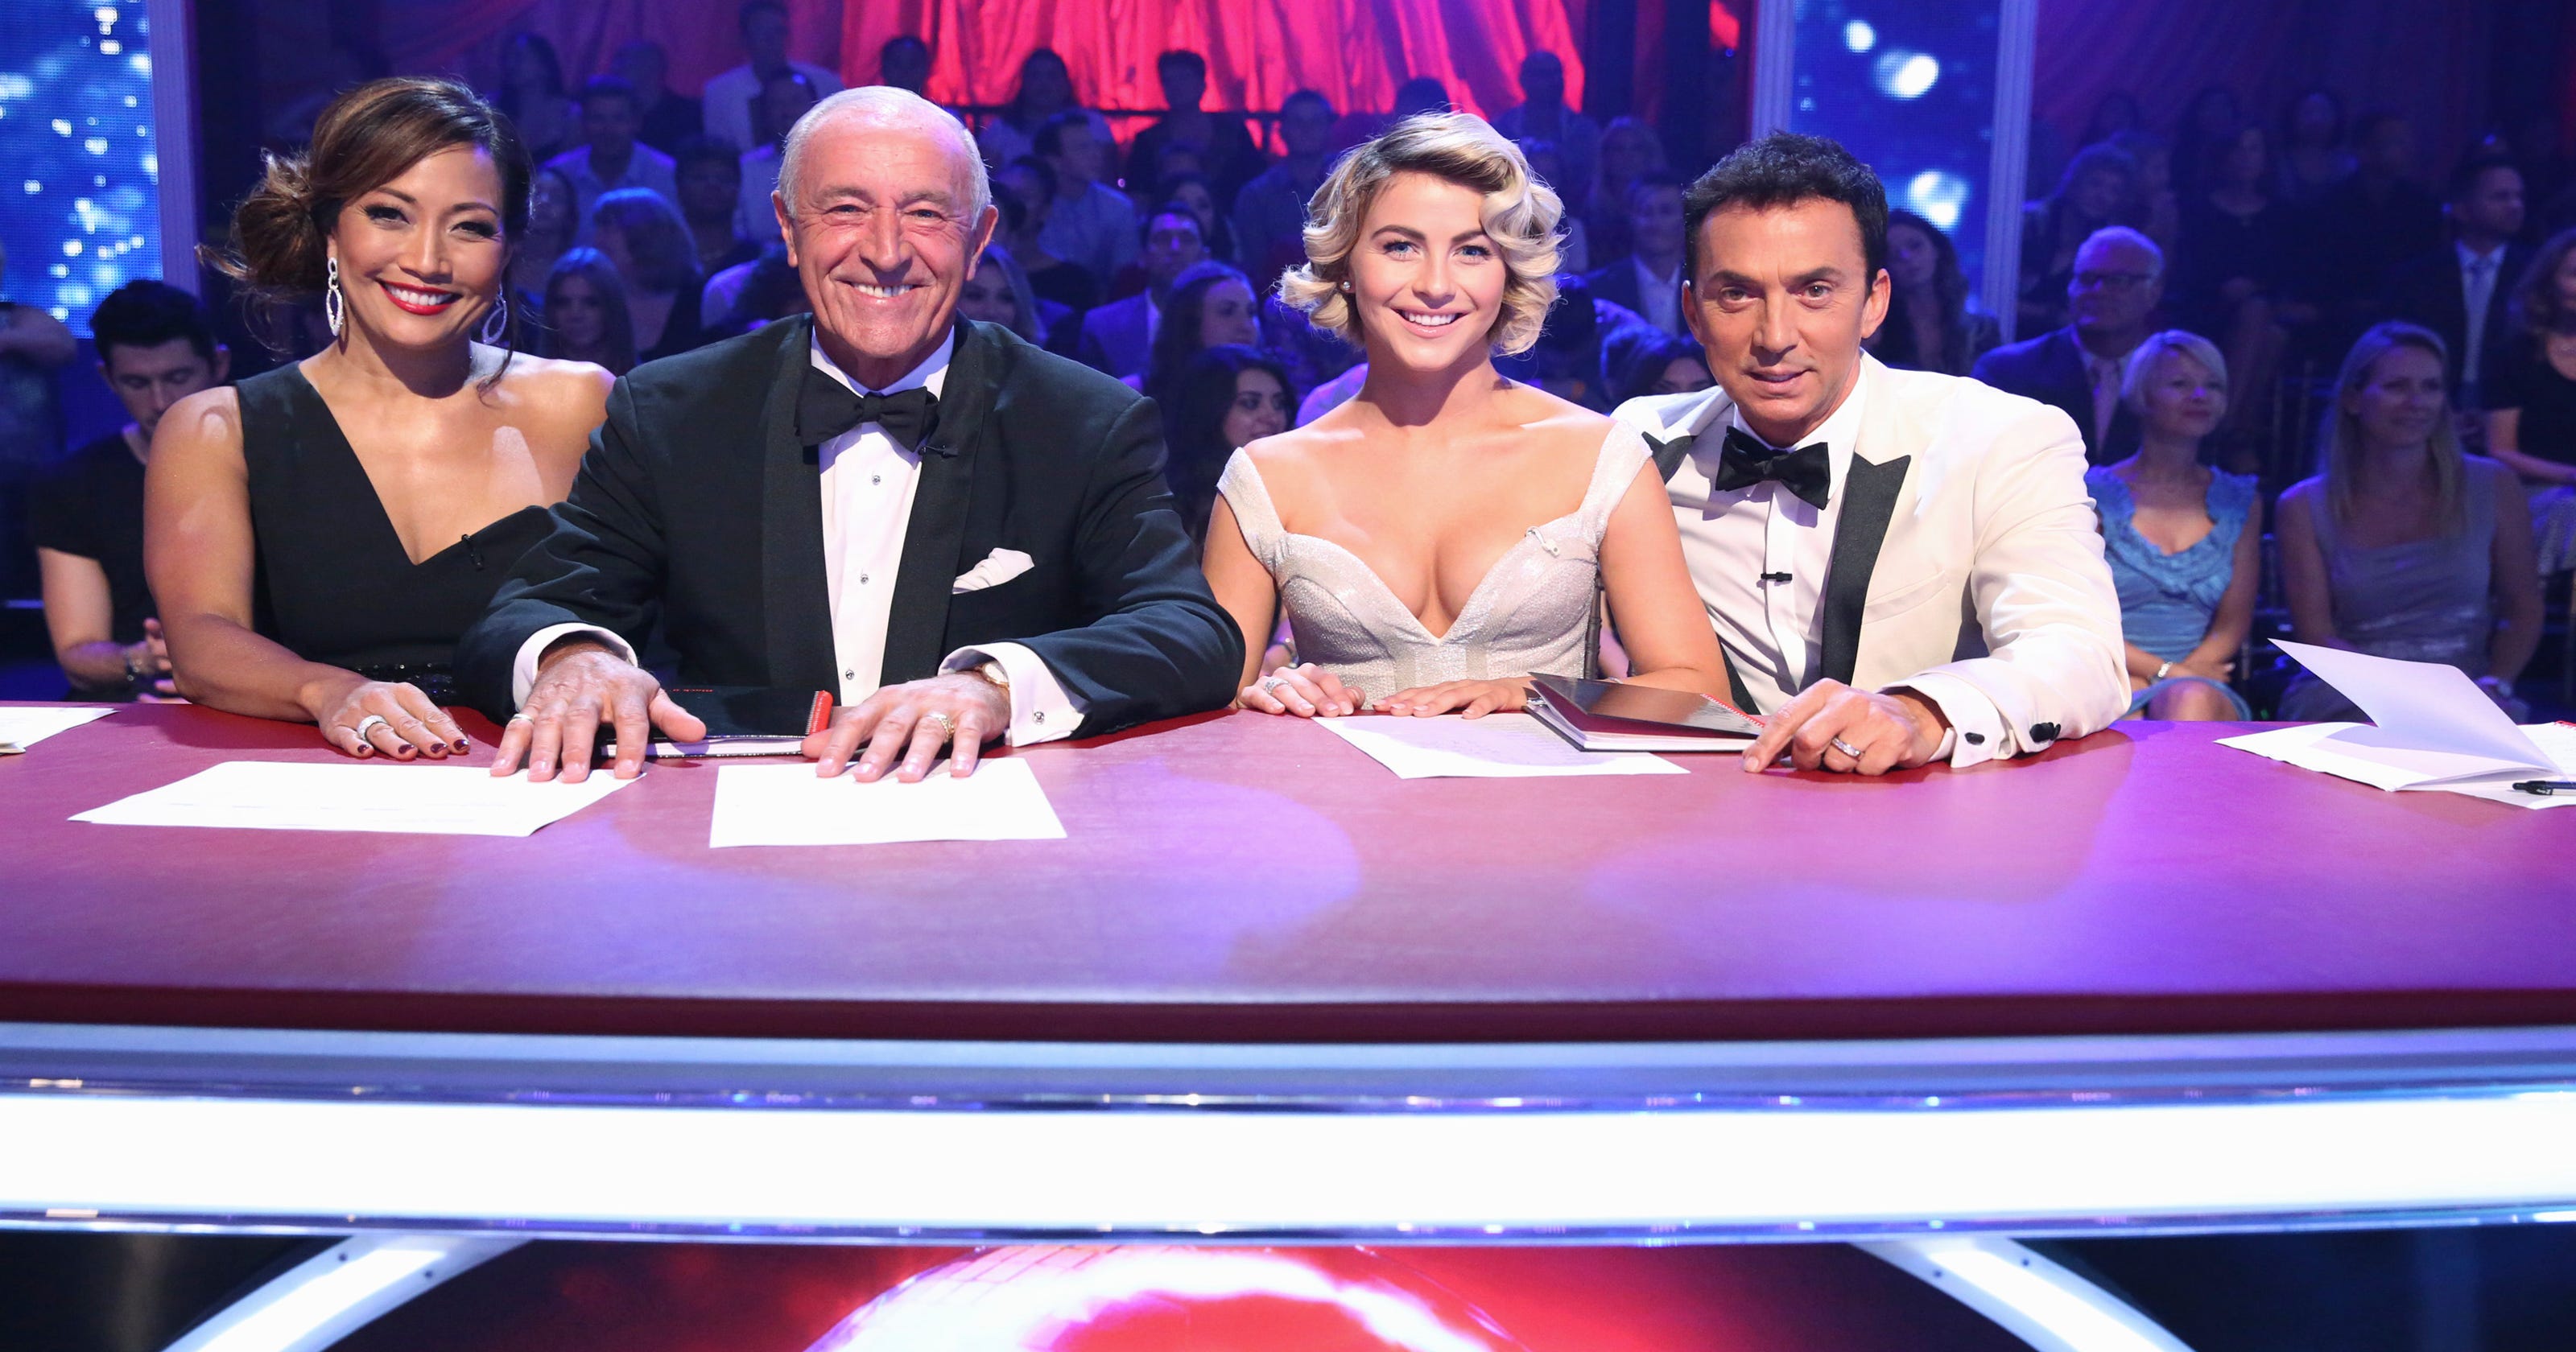 ‘Dancing with the Stars’ judges dish